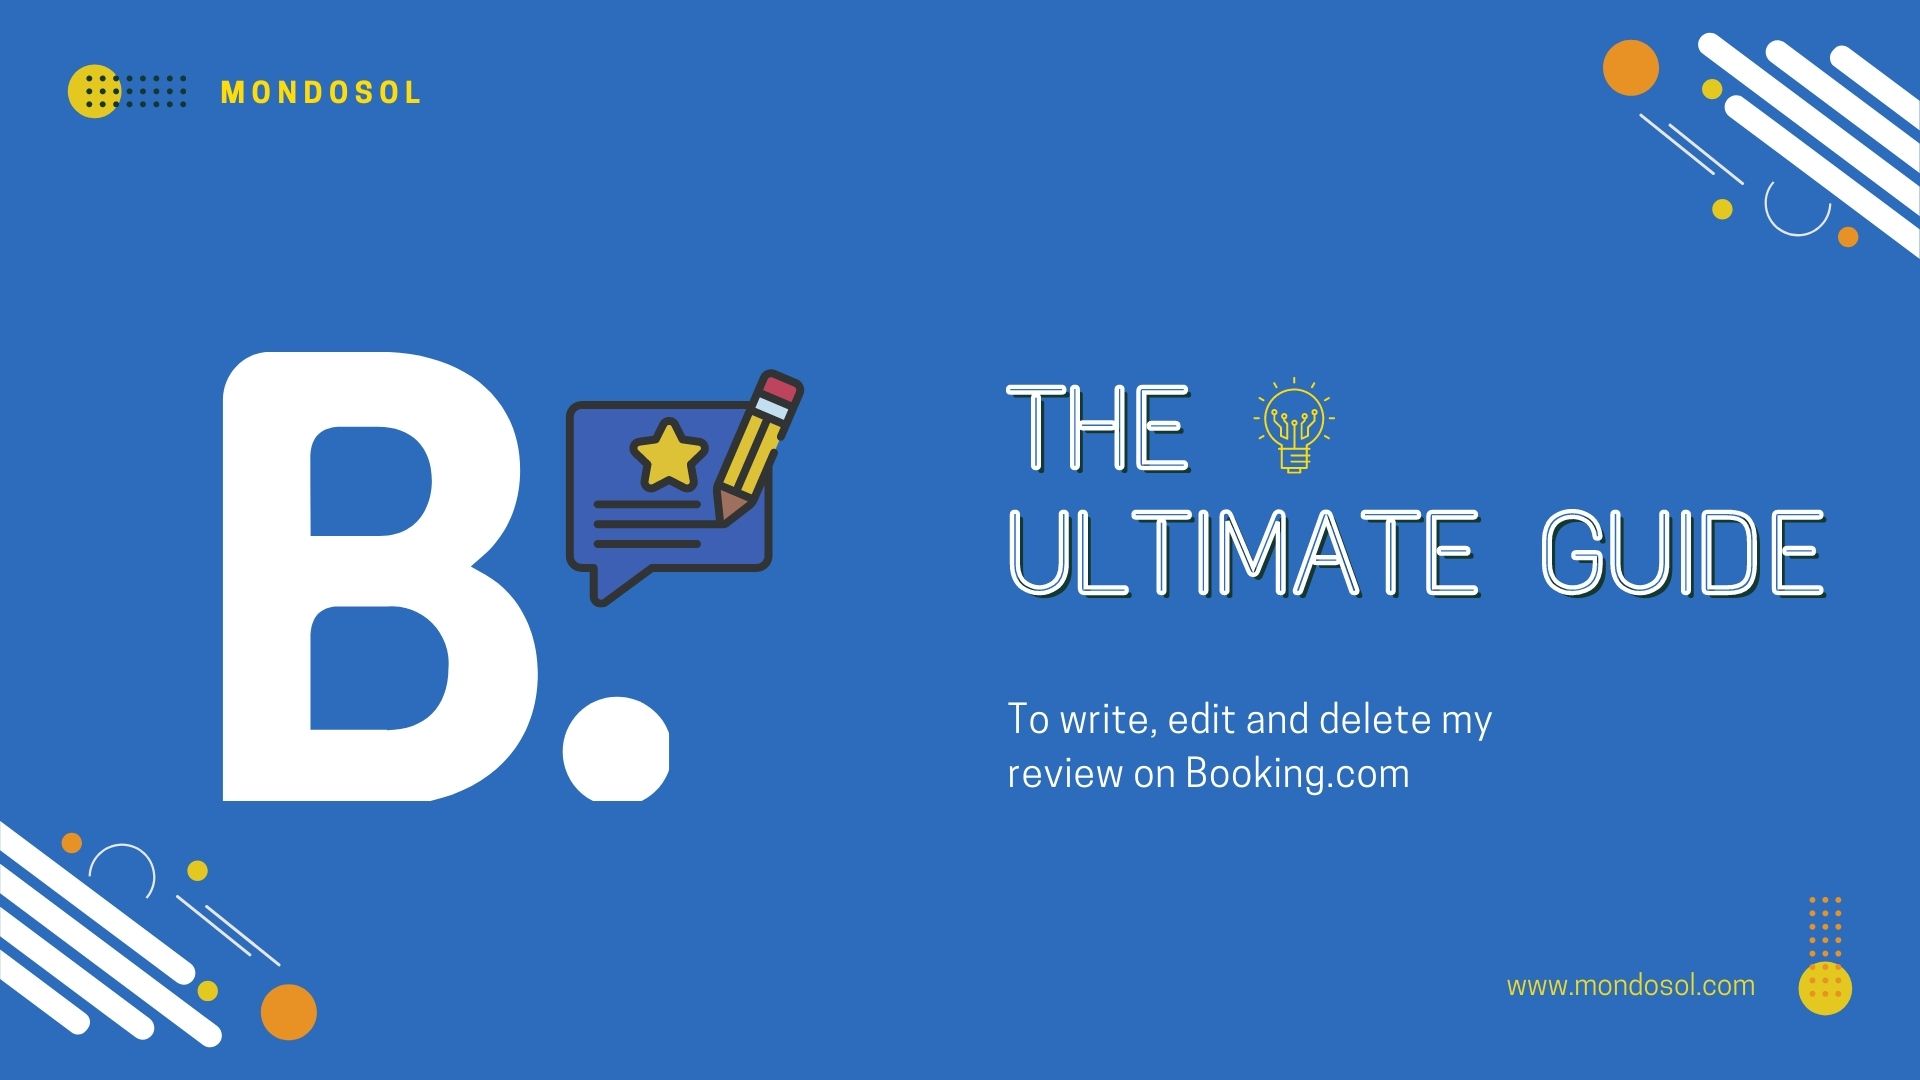 The Ultimate Guide To write, edit and delete my review on Booking.com